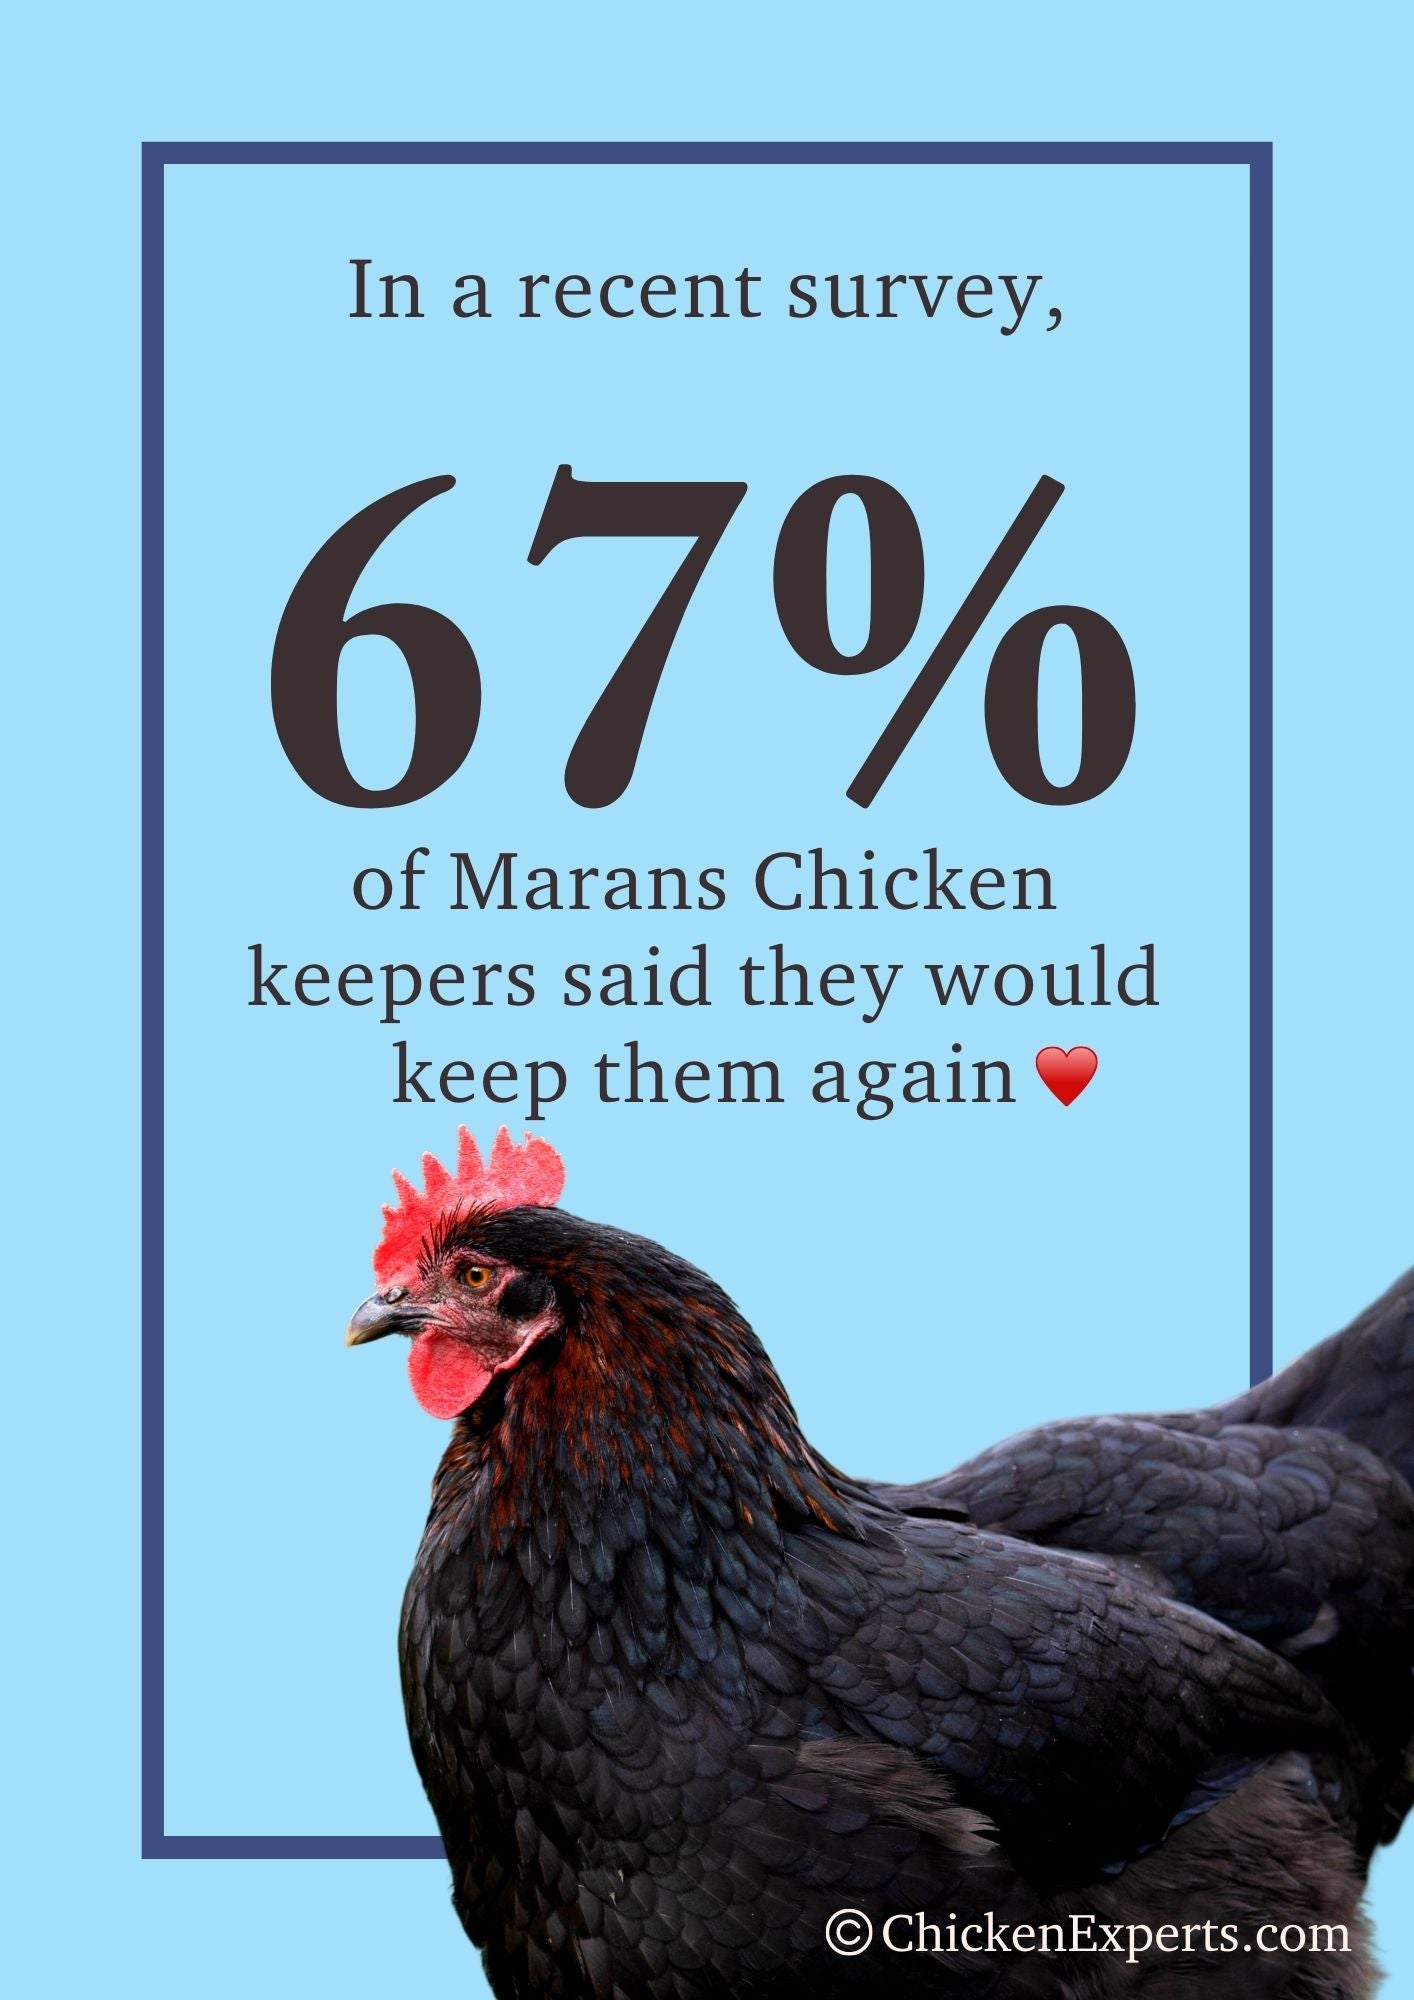 marans chicken keepers said they will keep them again